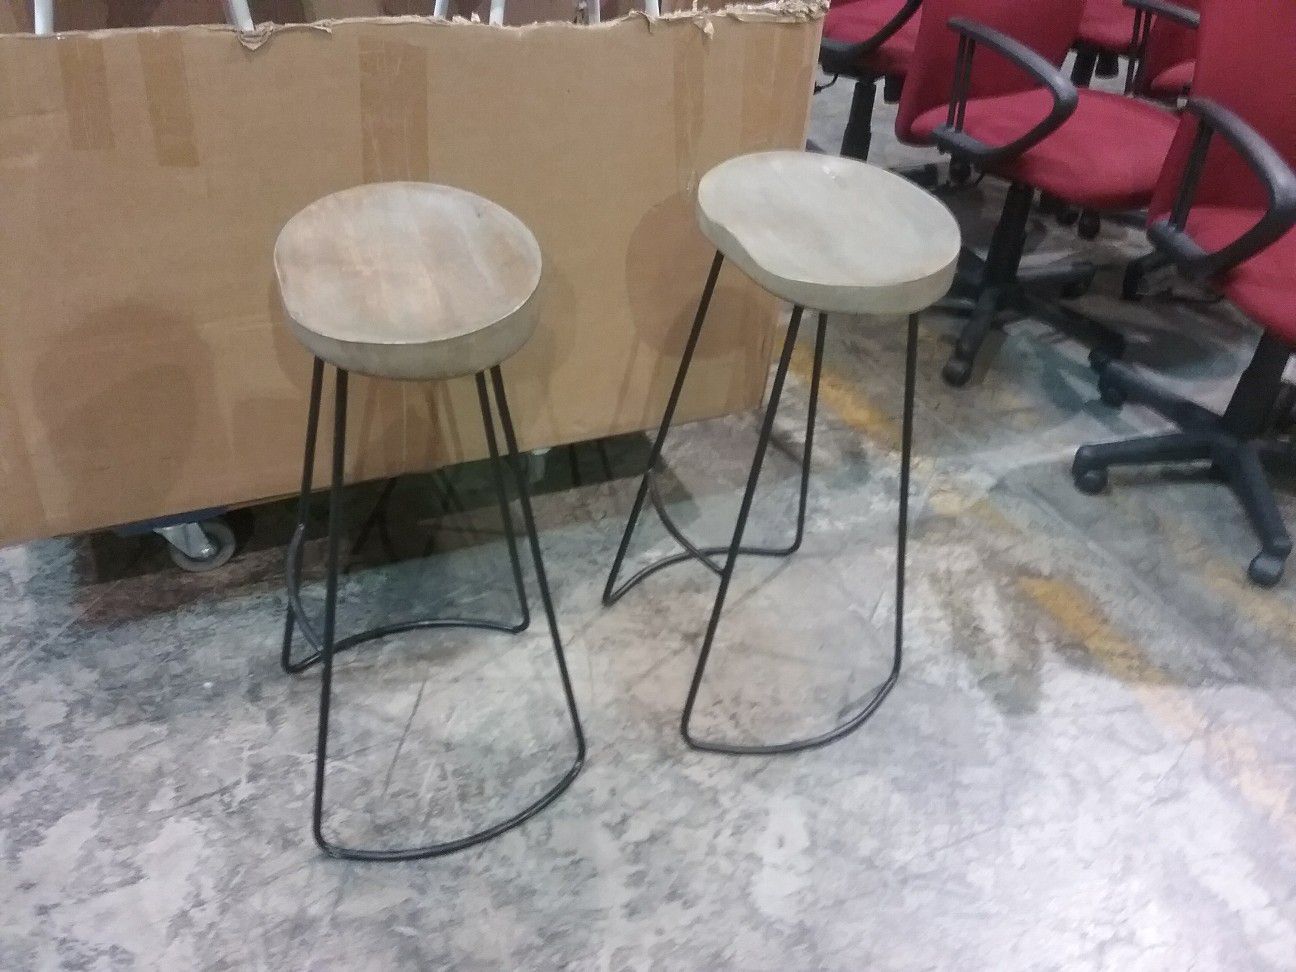 LQQK ~~~~~~~~ FOUR (4) Rugged bar stools .... really cool